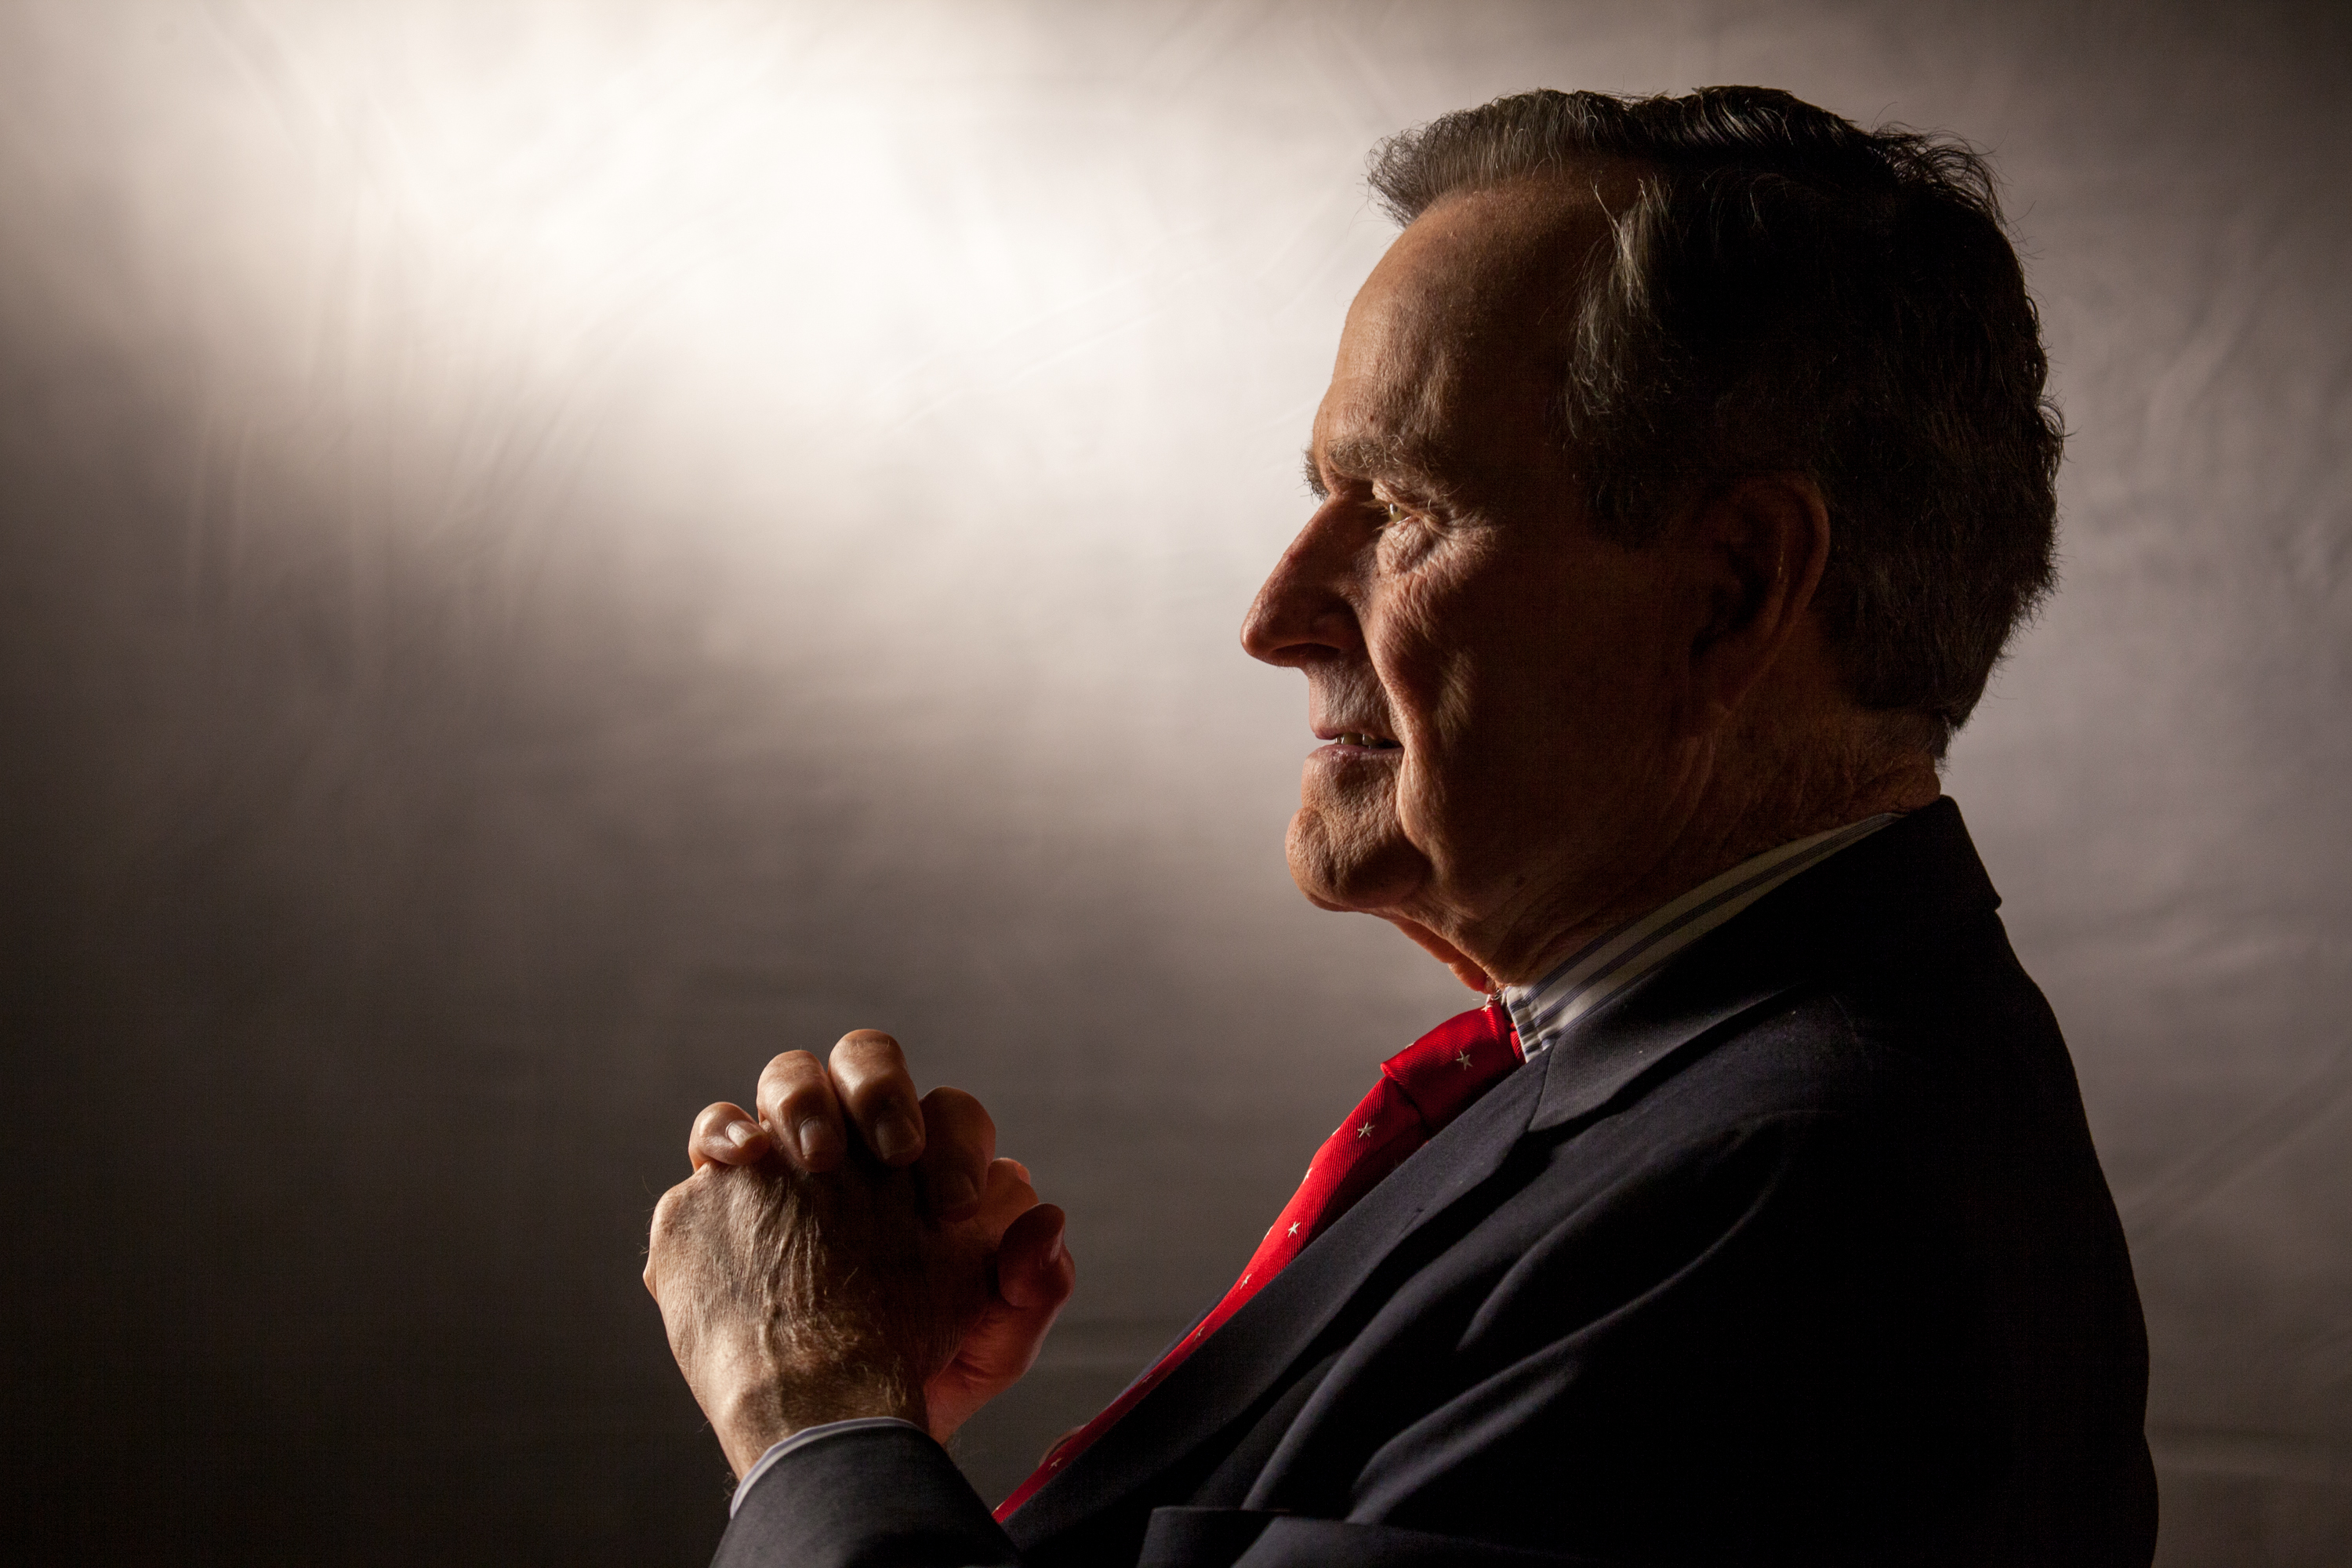 Former President George H.W. Bush is interviewed for 'The Presidents' Gatekeepers' project about the White House Chiefs of Staff at the Bush Library, October 24, 2011, in College Station, Texas. (David Hume Kennerly—Getty Images)